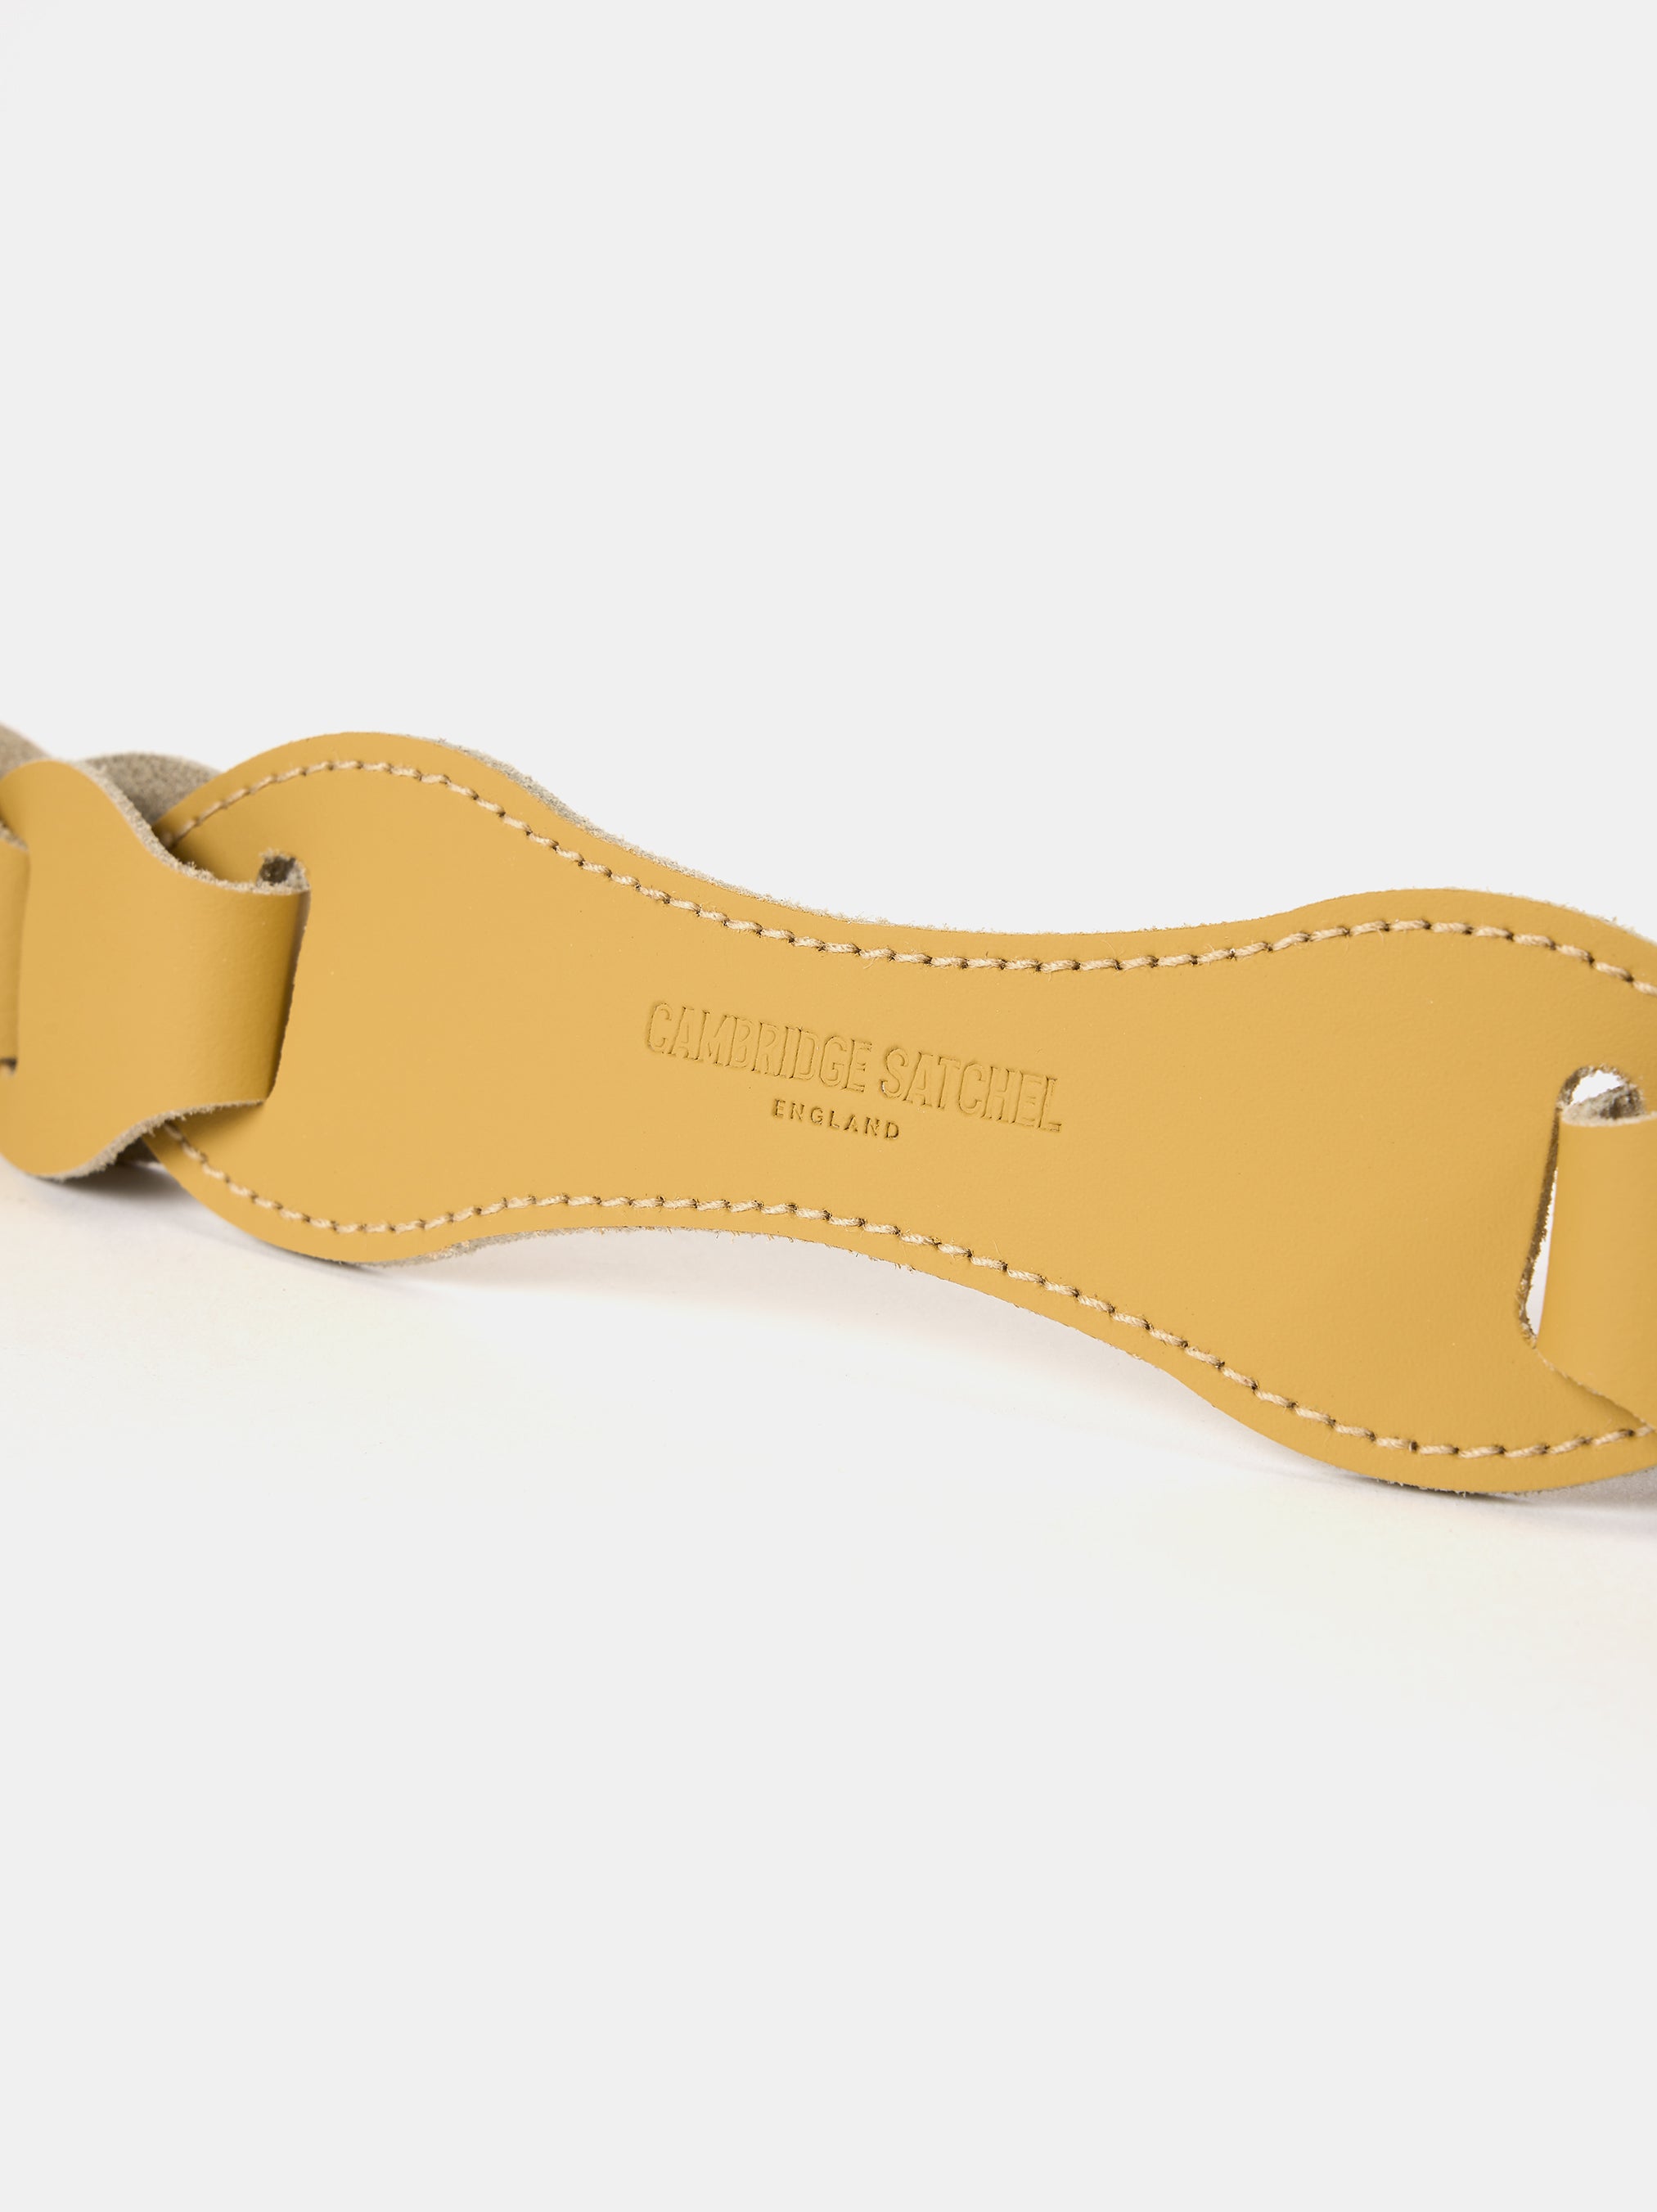 The Link Strap - Indian Yellow Matte & Pale Gold Hardware